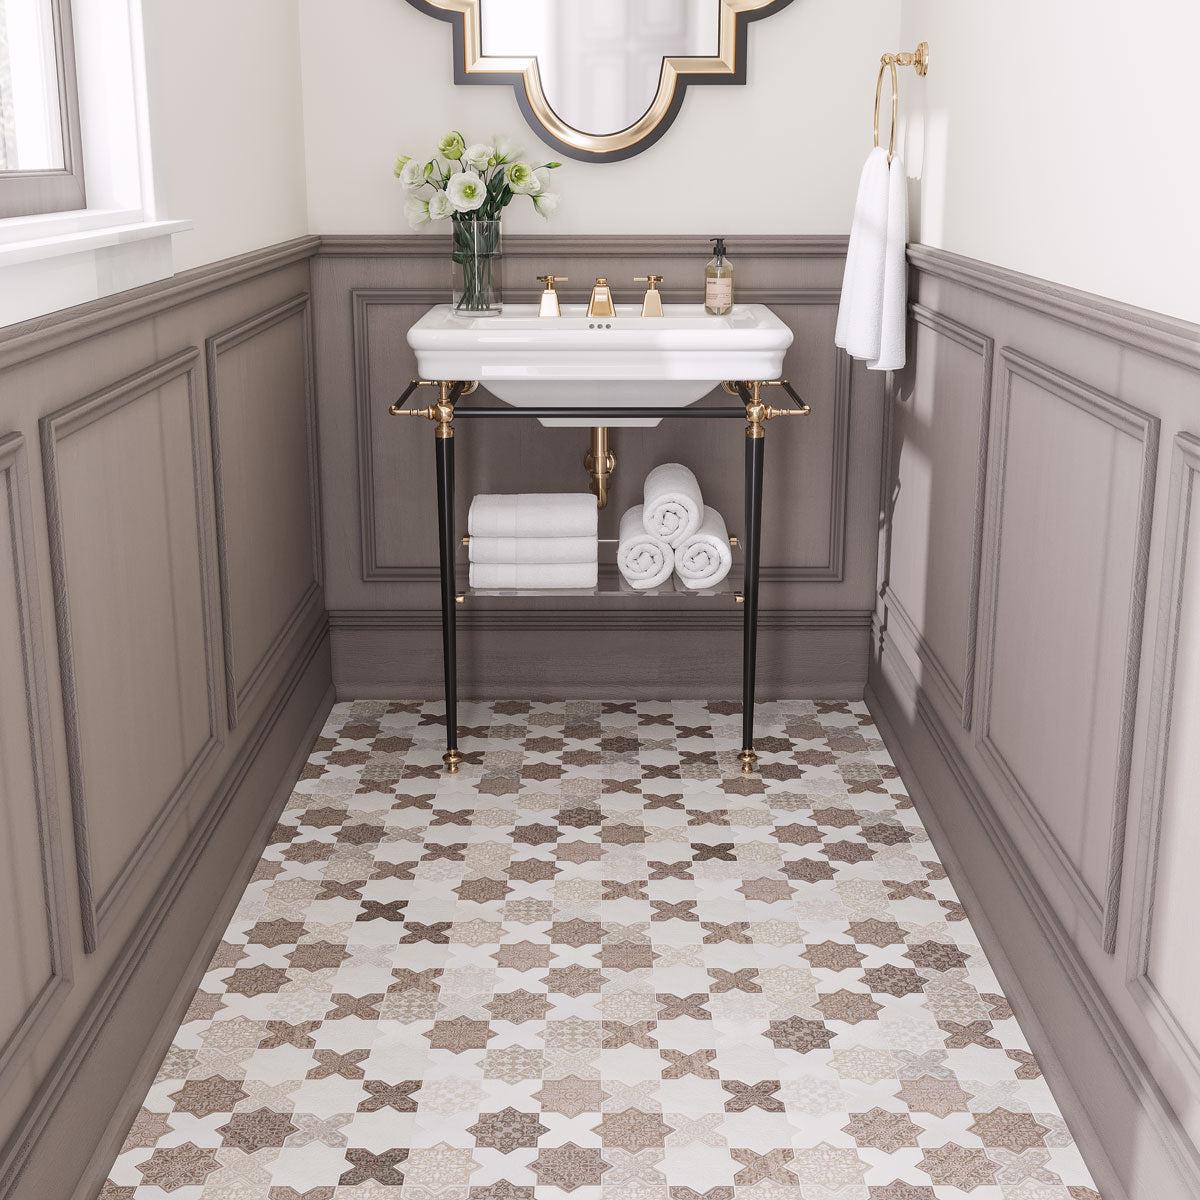 Moroccan Bathroom floor with star and cross marble tiles